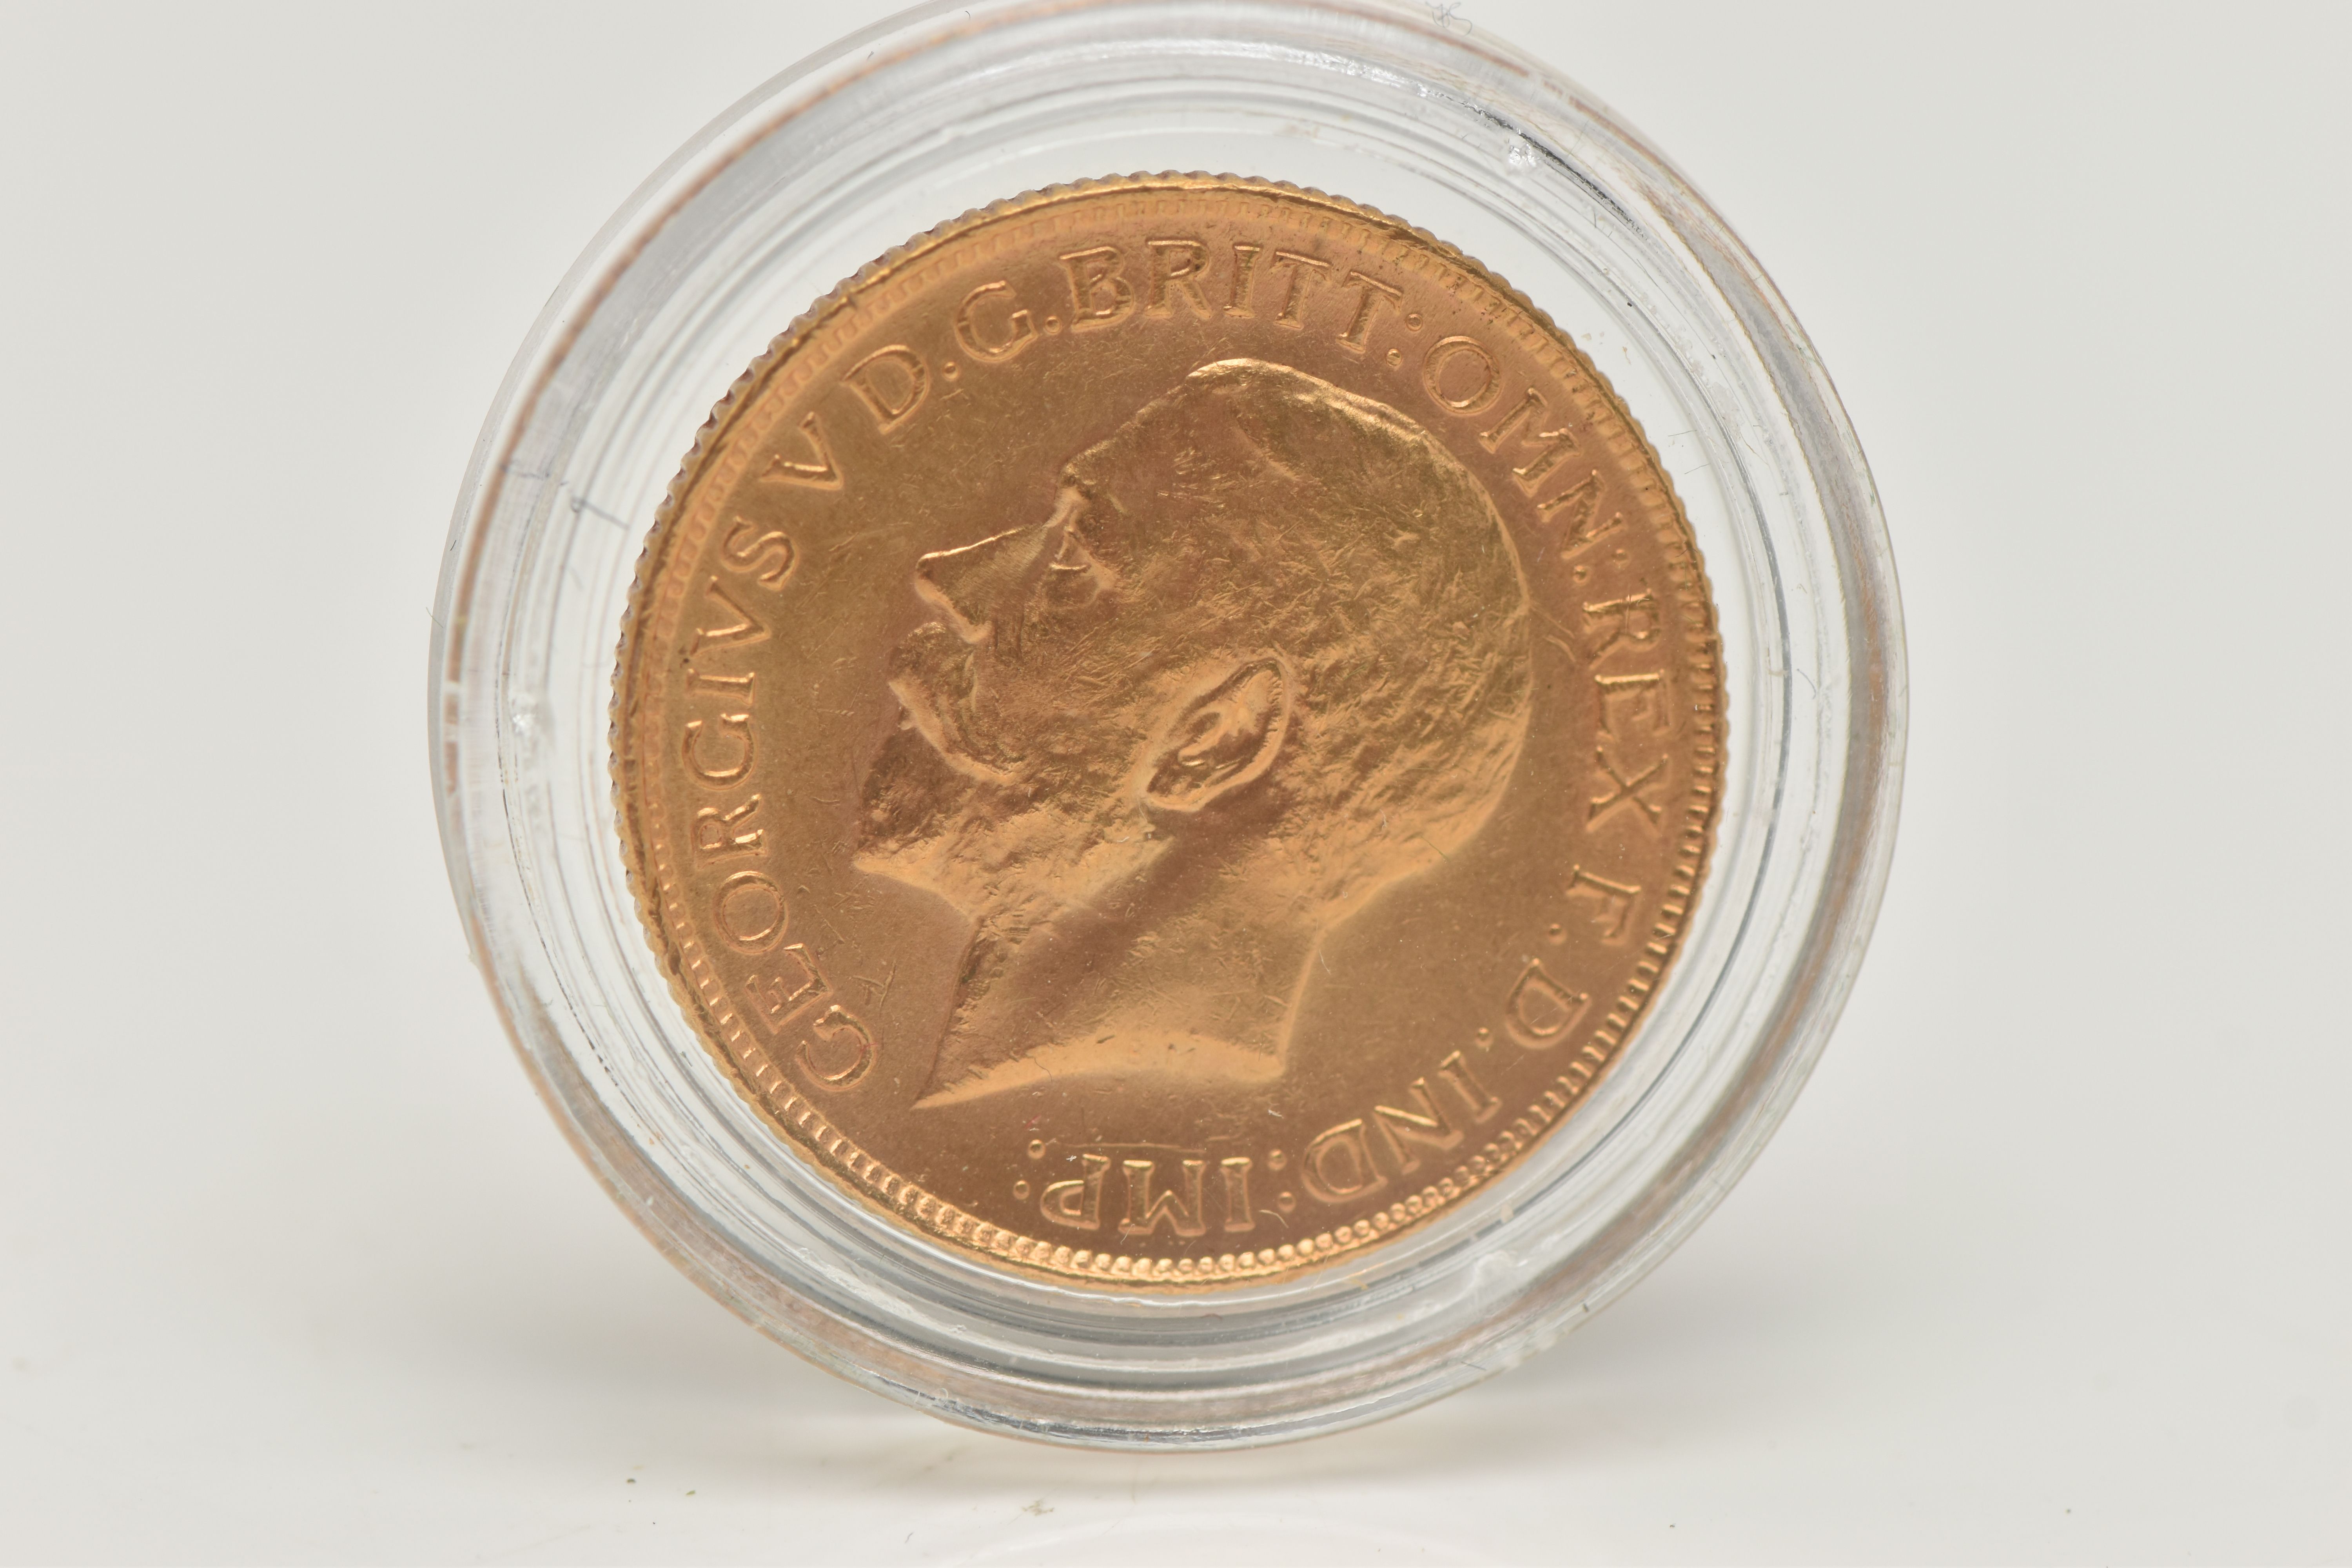 A FULL GOLD SOVEREIGN COIN SYDNEY MINT 1915, depicting George V, 22ct, 7.98 grams, 22.05mm diameter - Image 2 of 2